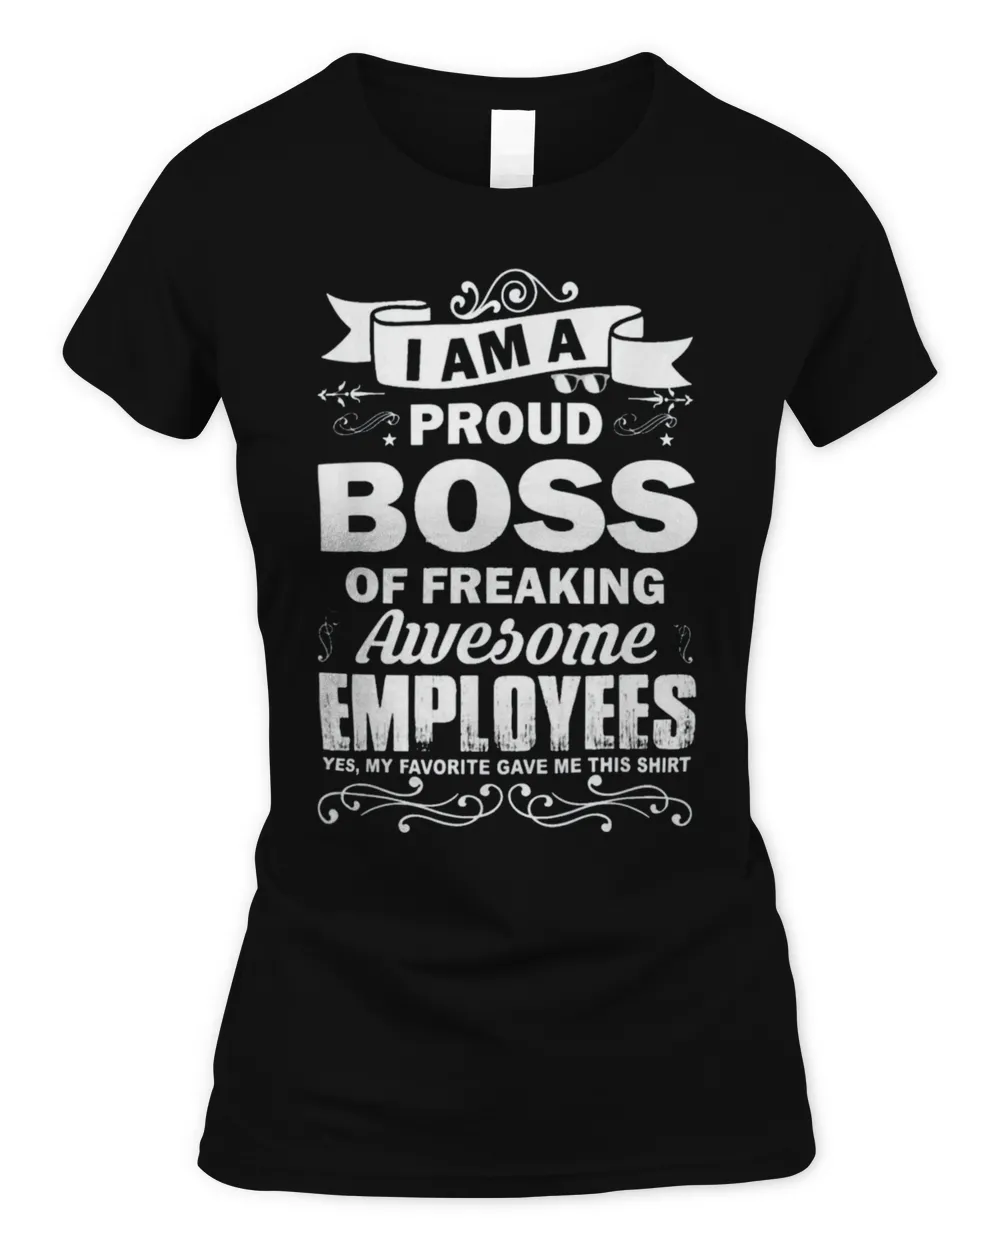 I Am A Proud Boss Of Stubborn Employees They Are a Bit Crazy T-Shirt